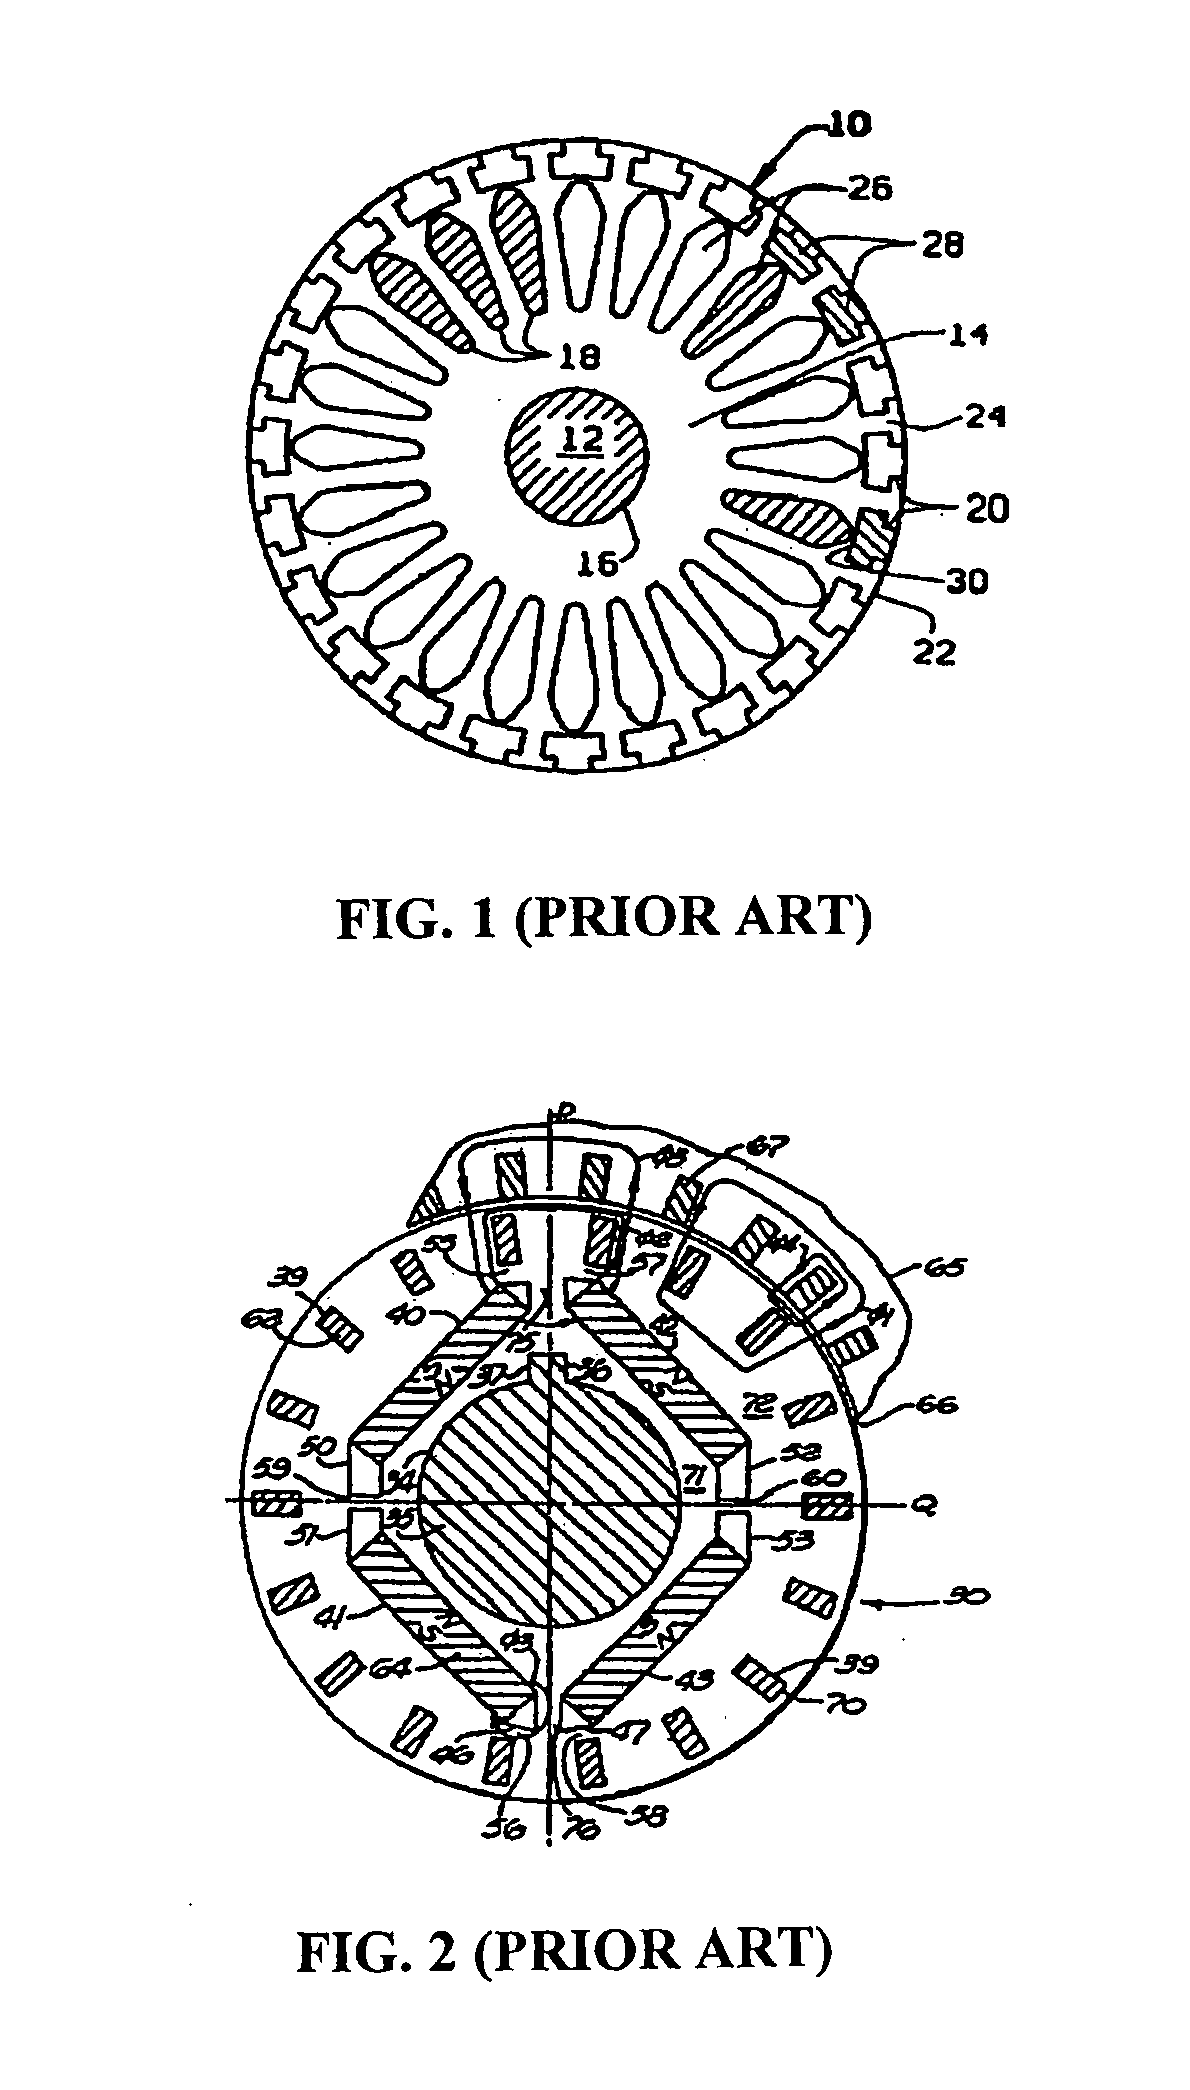 Rotor structure of line-start permanent magnet synchronous motor